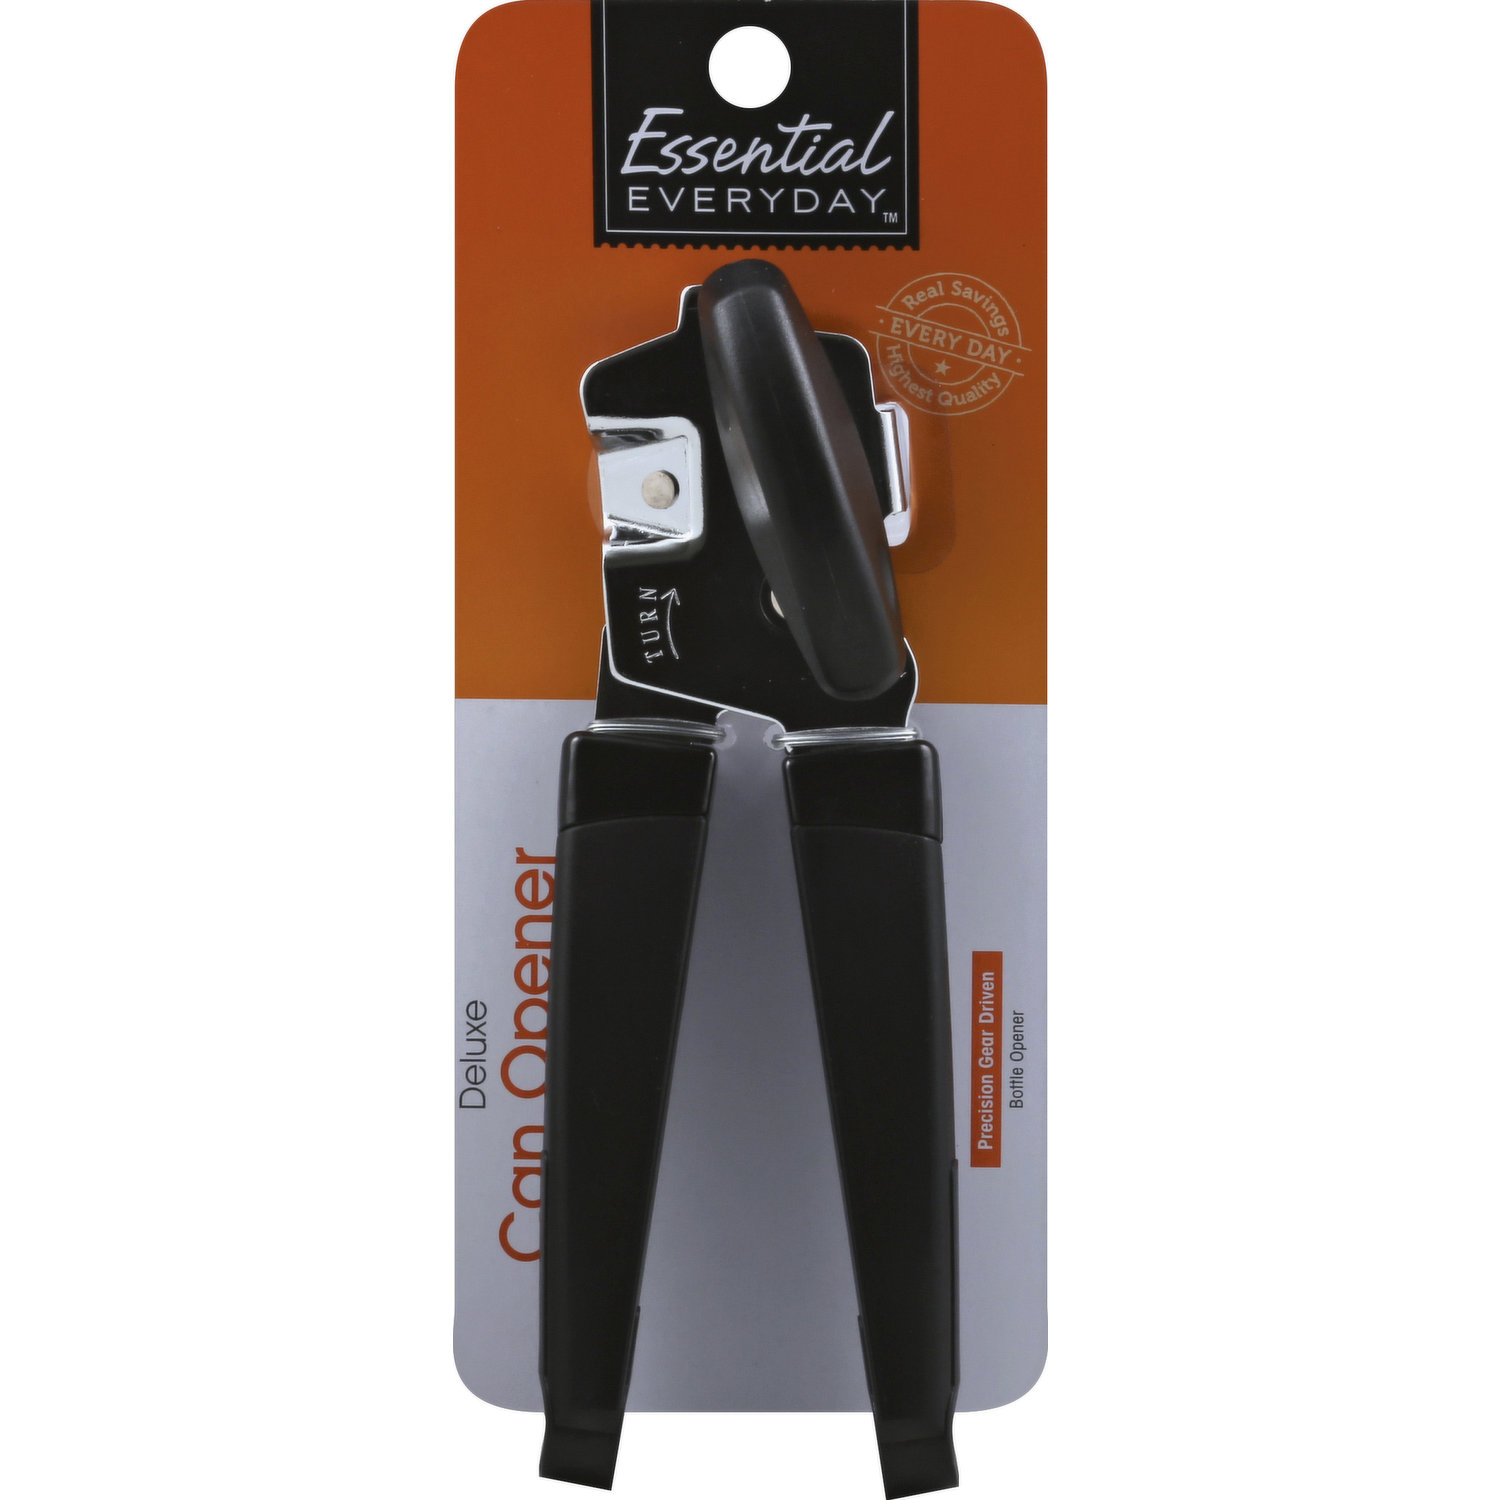 Essential Everyday Can Opener, Deluxe, Baking & Cooking Accessories